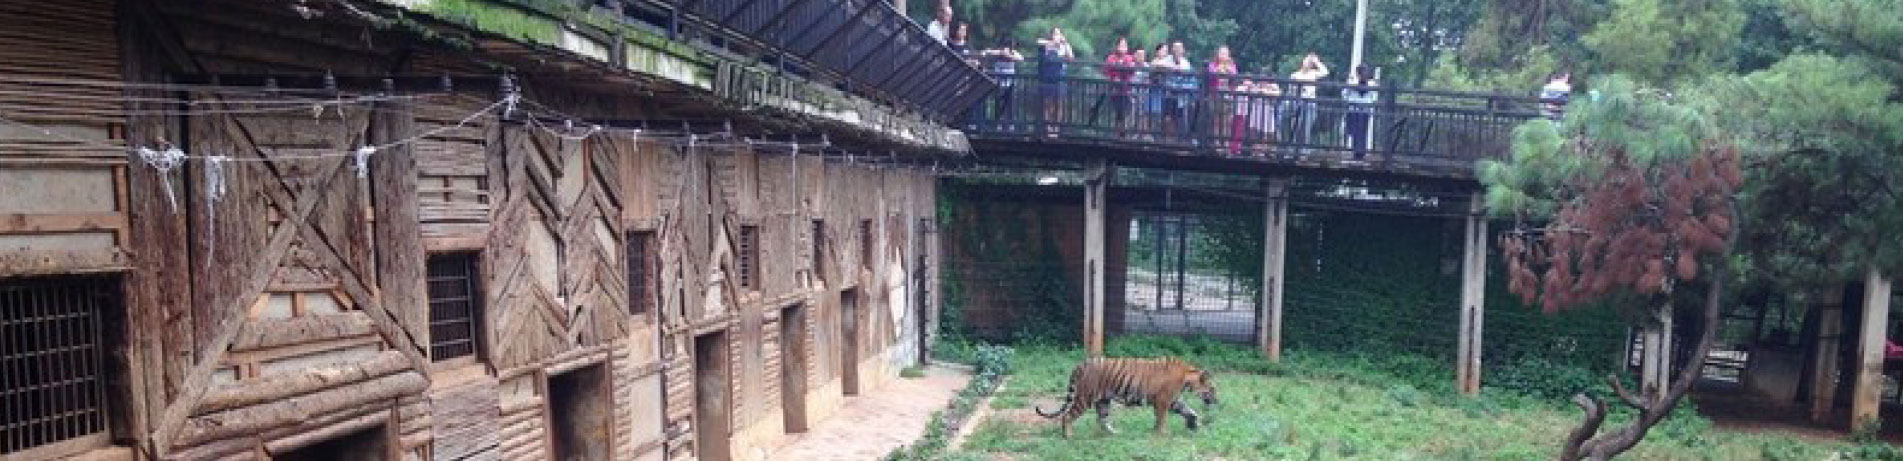 Captive tiger in an enclosure with people watching from an overhead walkway